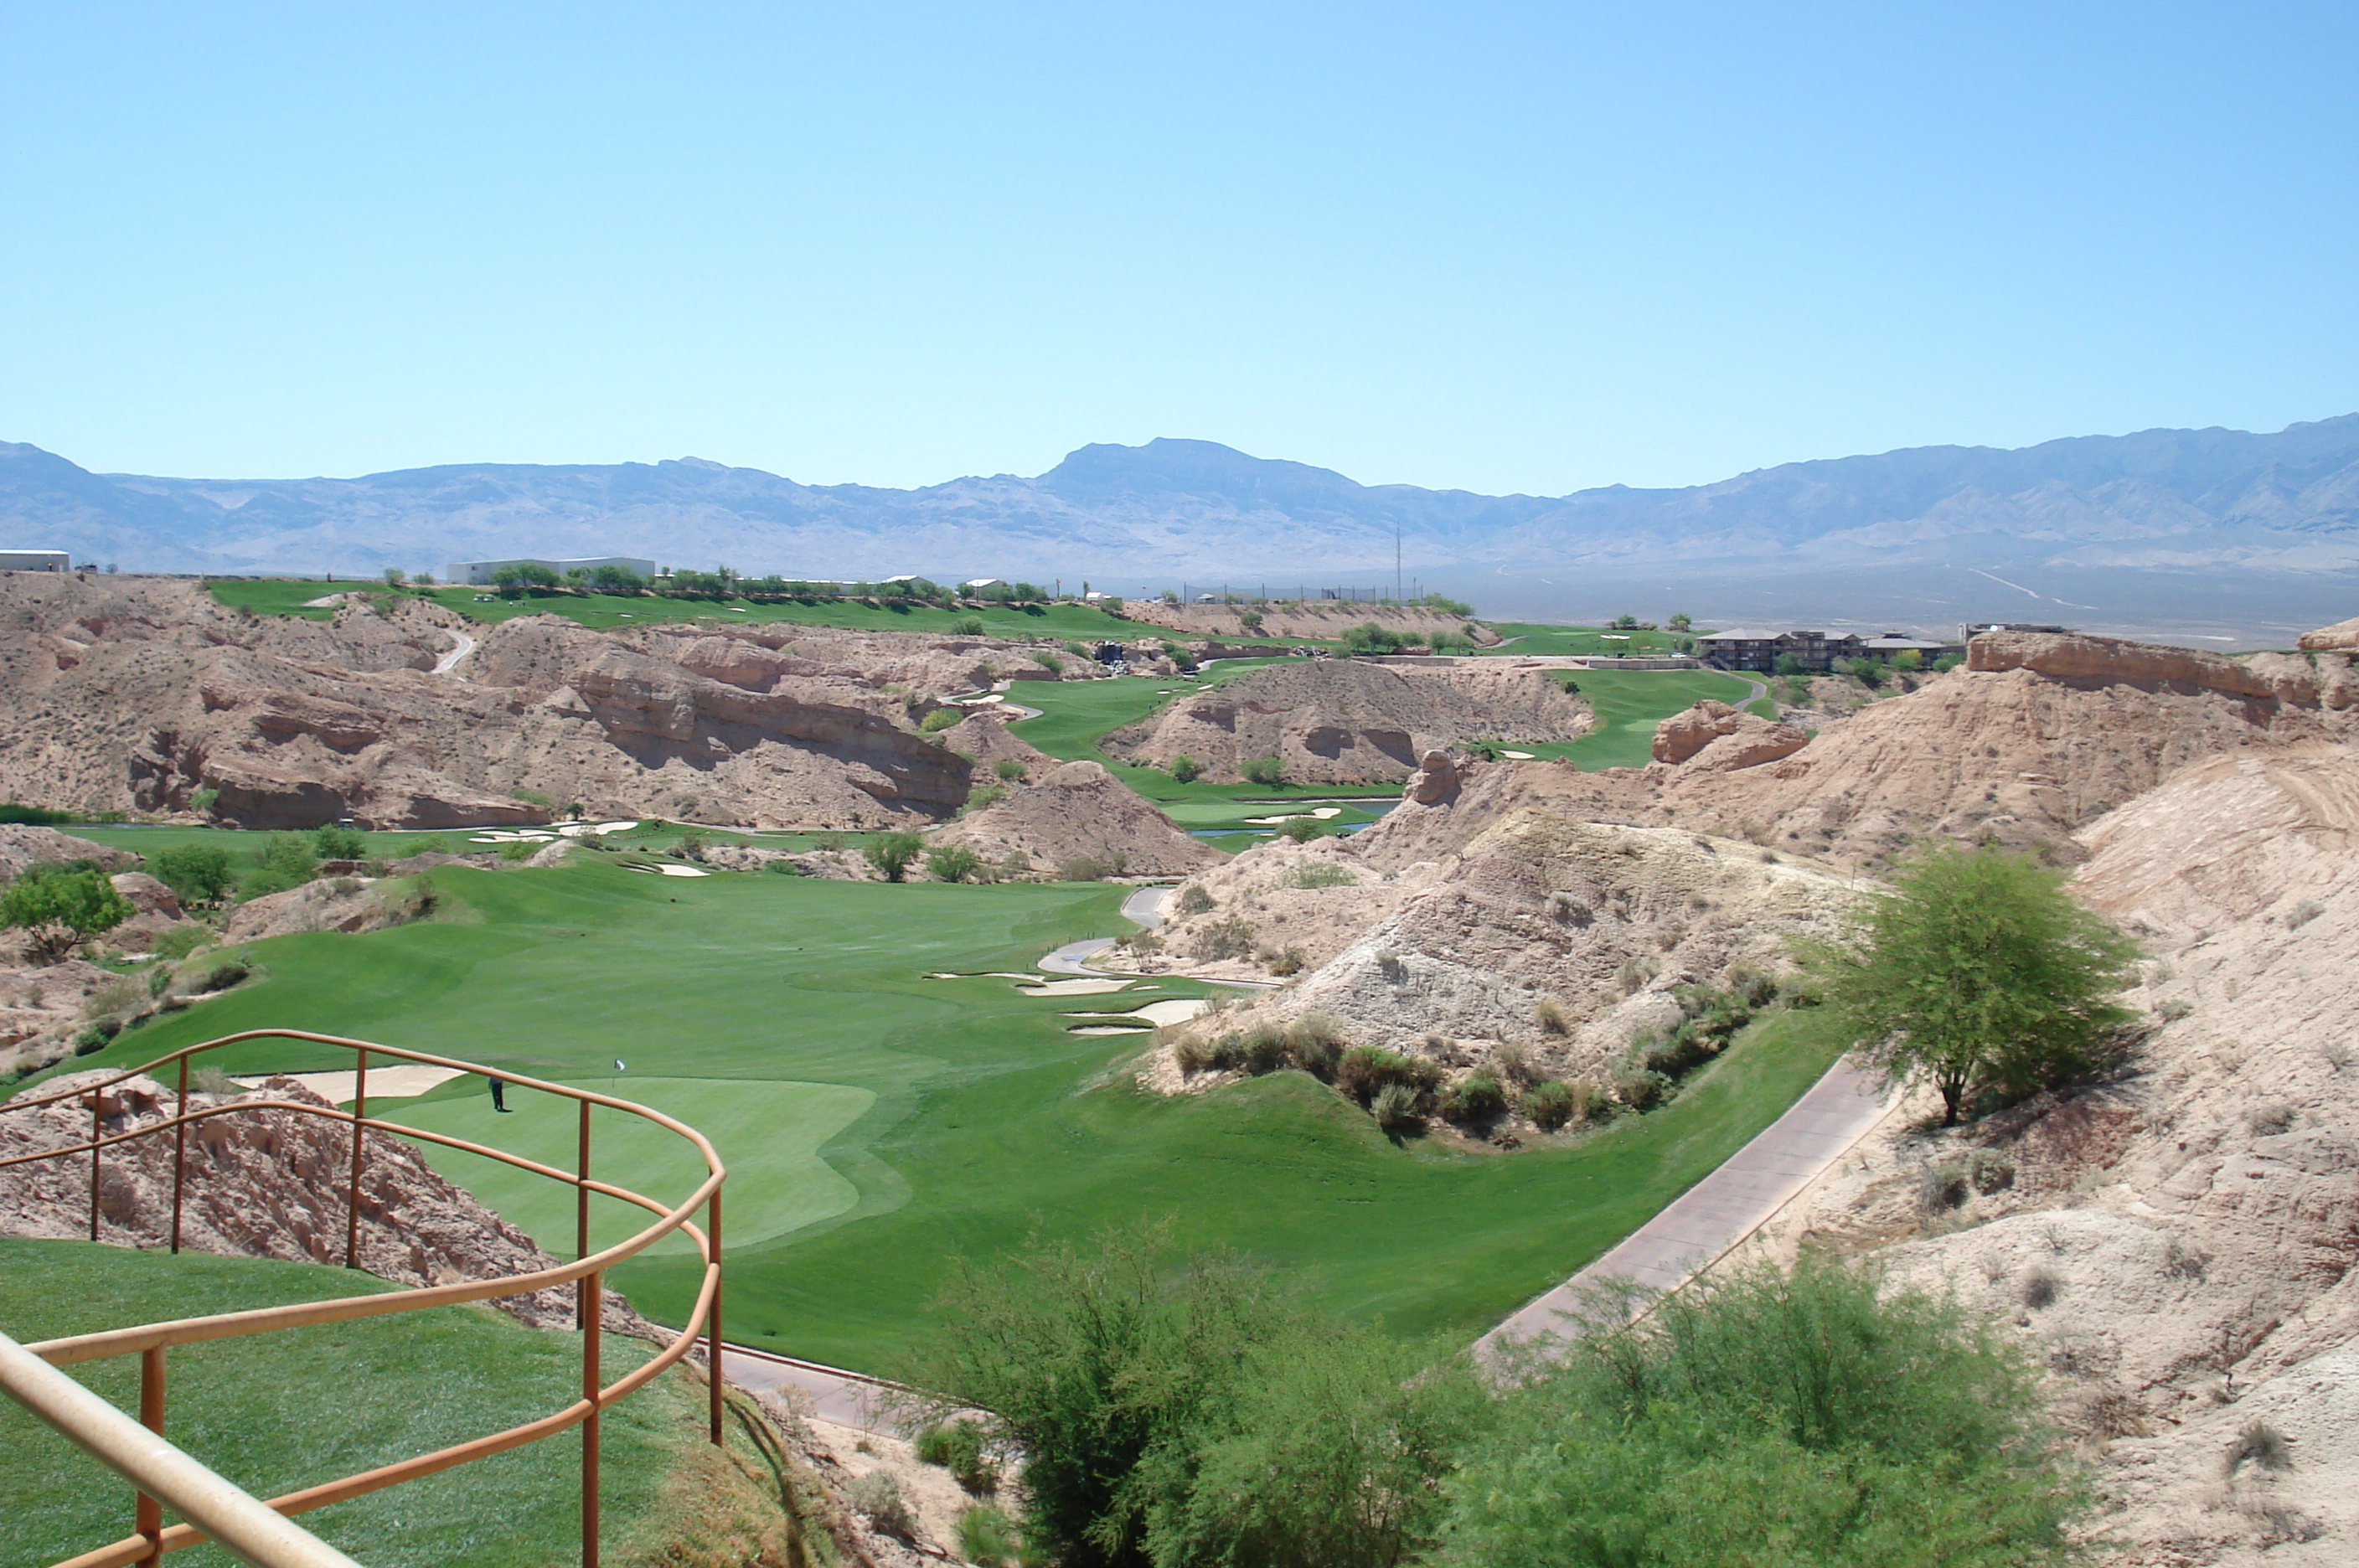 Golf blog containing golf resort review, golf ratings and golf trip information for your golf resort vacation to a top golf resort